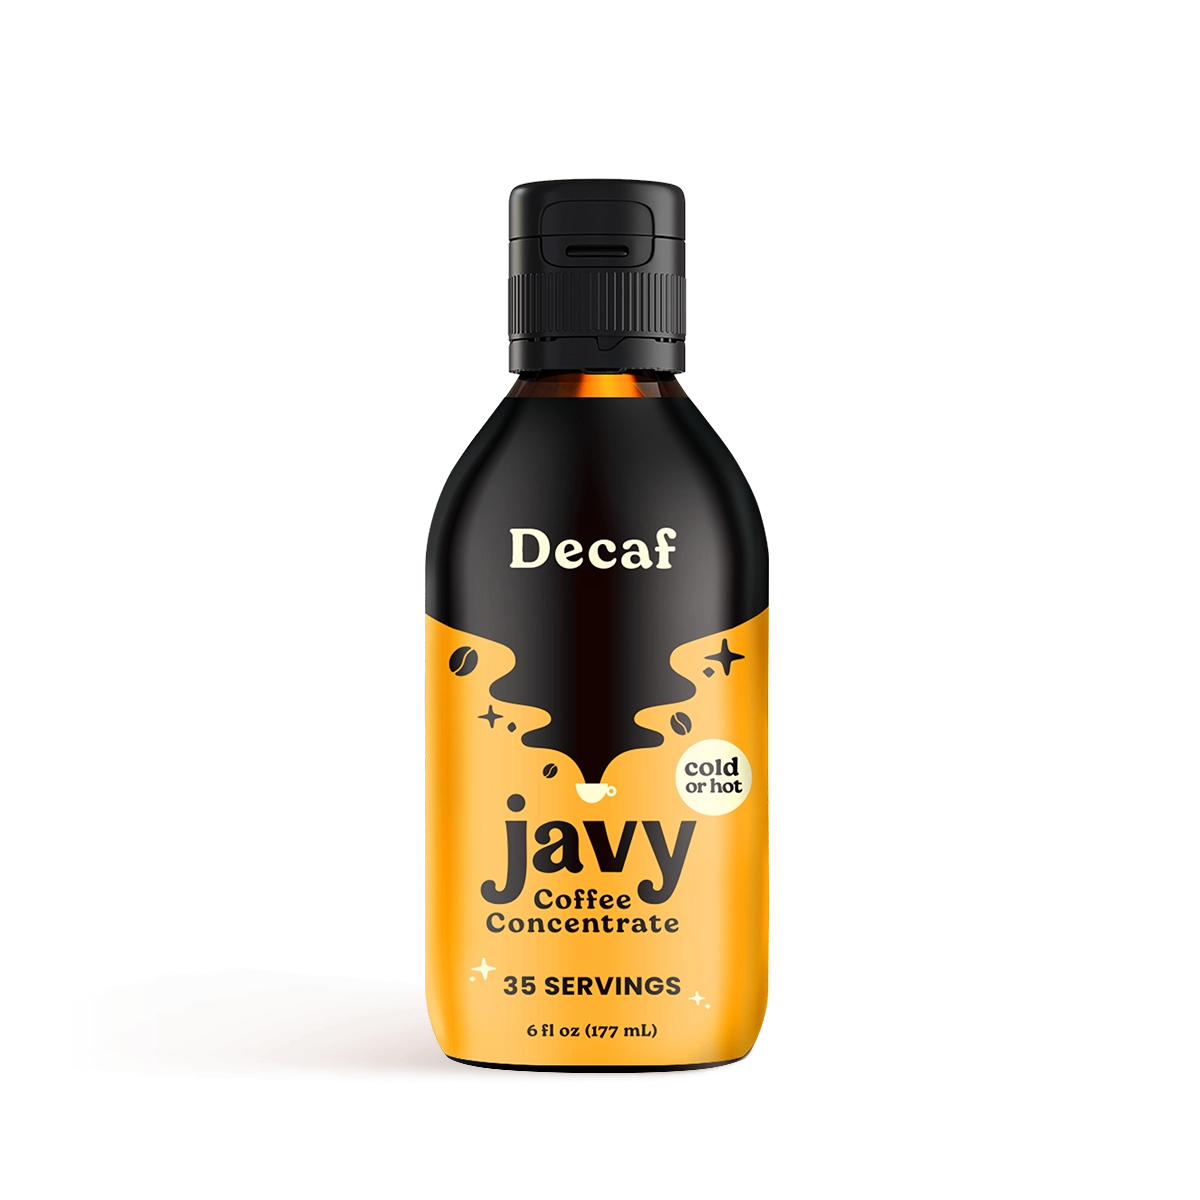 Decaf Coffee Concentrate